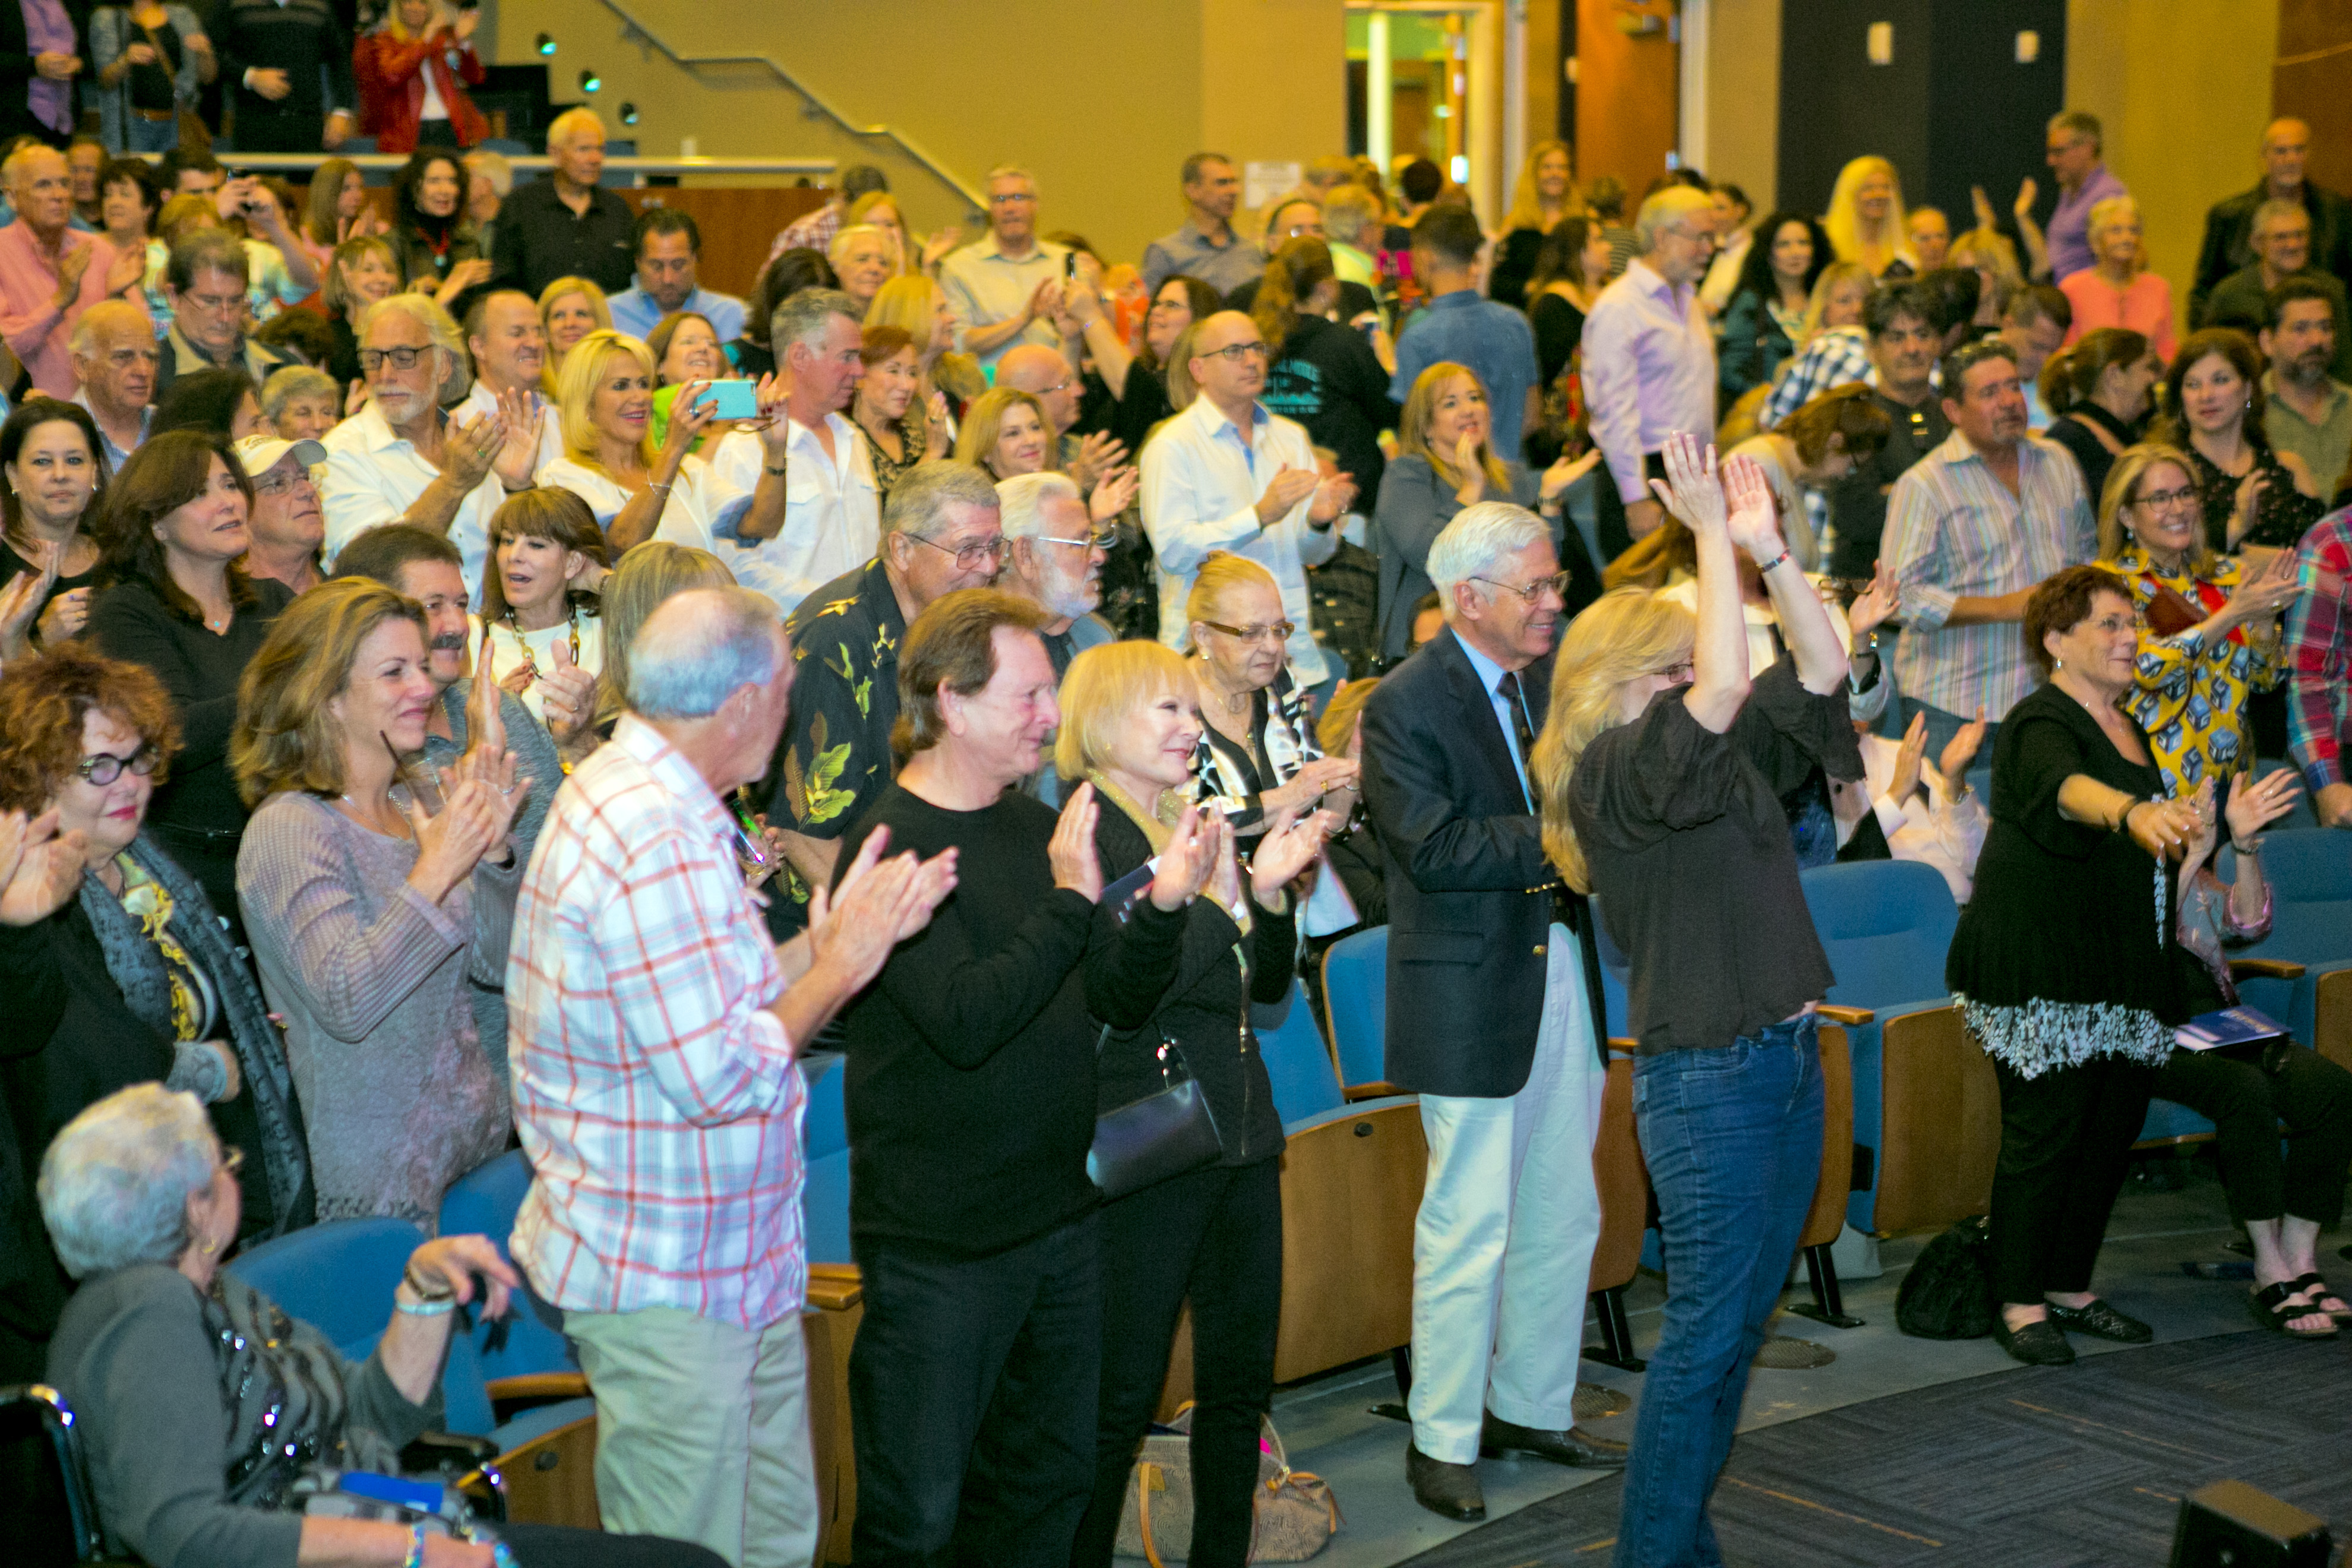 Audience enjoying the performance with a standing ovation